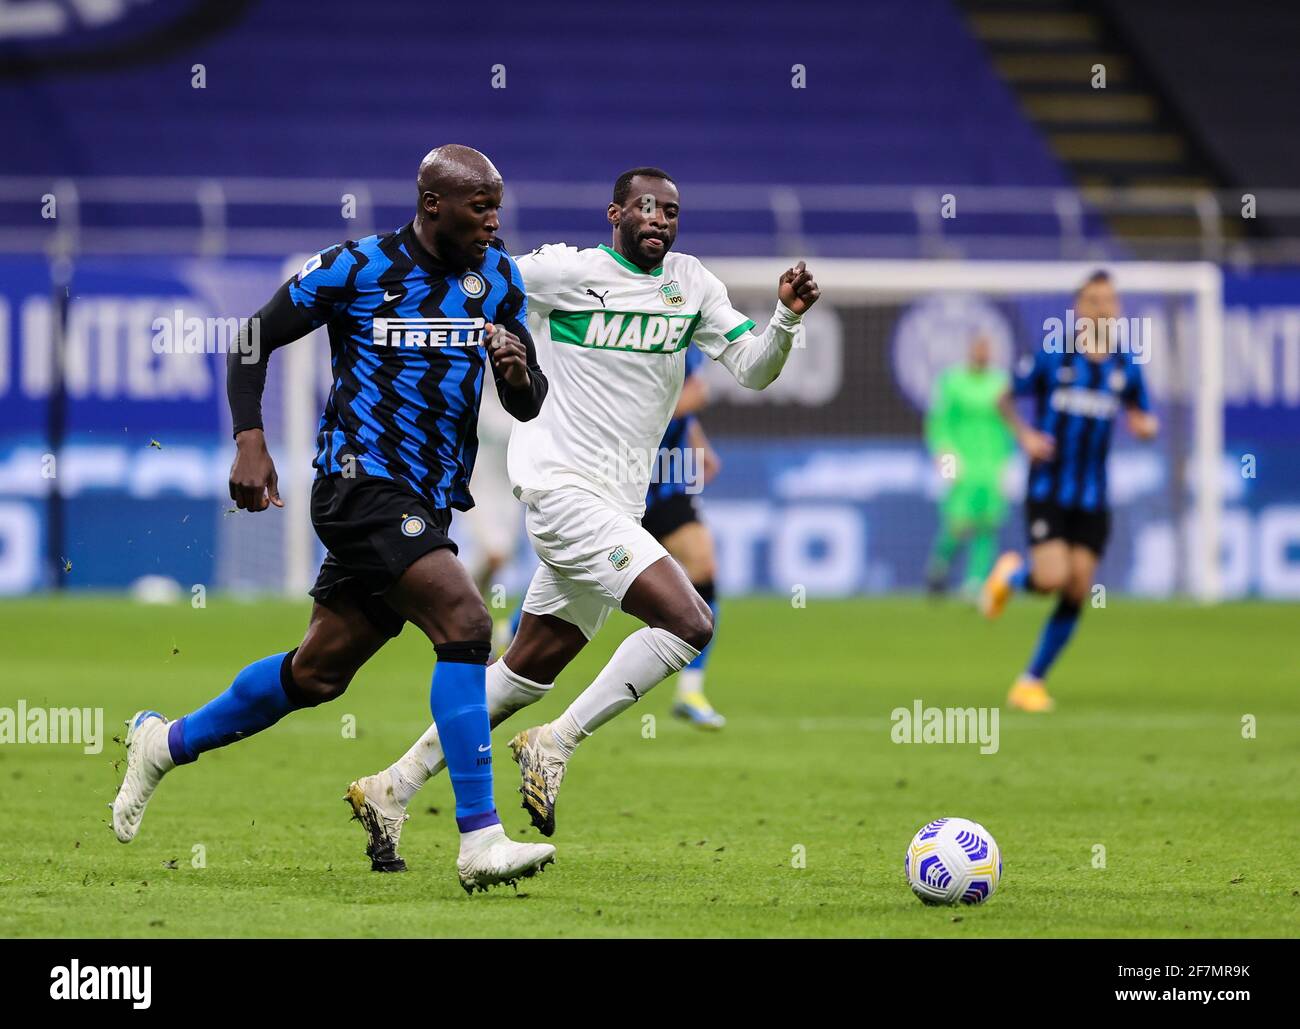 Milan, Italy. 07th Apr, 2021. Romelu Lukaku of FC Internazionale and Pedro Obiang of US Sassuolo are seen in action during the Serie A 2020/21 football match between FC Internazionale and Sassuolo at the San Siro Stadium.(Final score; FC Internazionale 2:1 Sassuolo) (Photo by Fabrizio Carabelli/SOPA Images/Sipa USA) Credit: Sipa USA/Alamy Live News Stock Photo